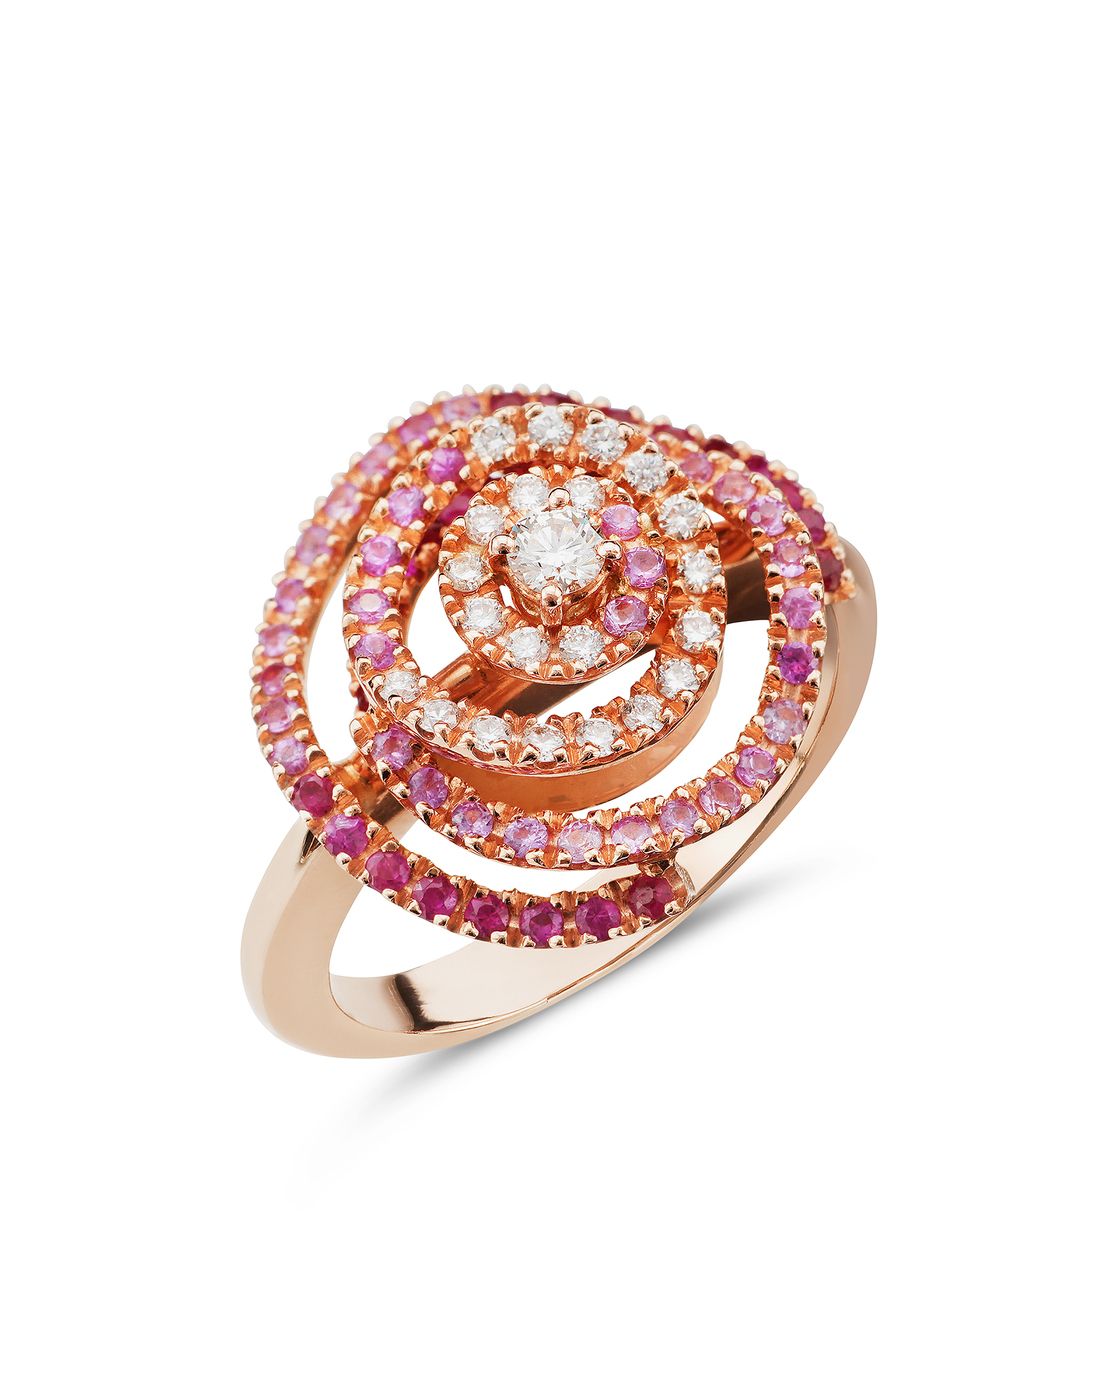 Leonori Gioielli Throughout Pink Sapphire And Rose Gold Cocktail Rings (View 22 of 25)